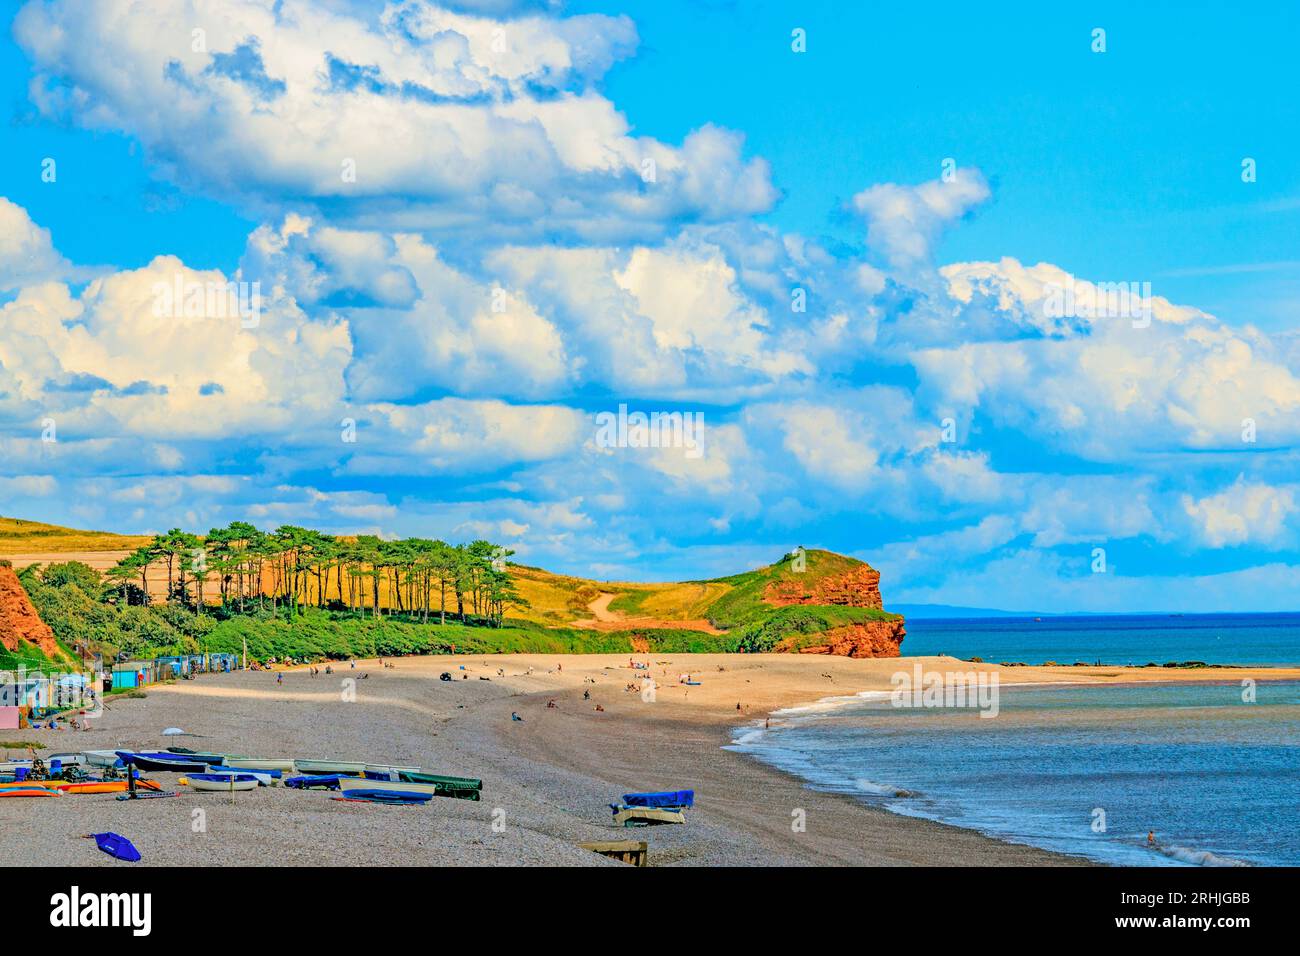 Colourful Boats On The Beach At Budleigh Salterton Looking East Towards The Mouth Of The River